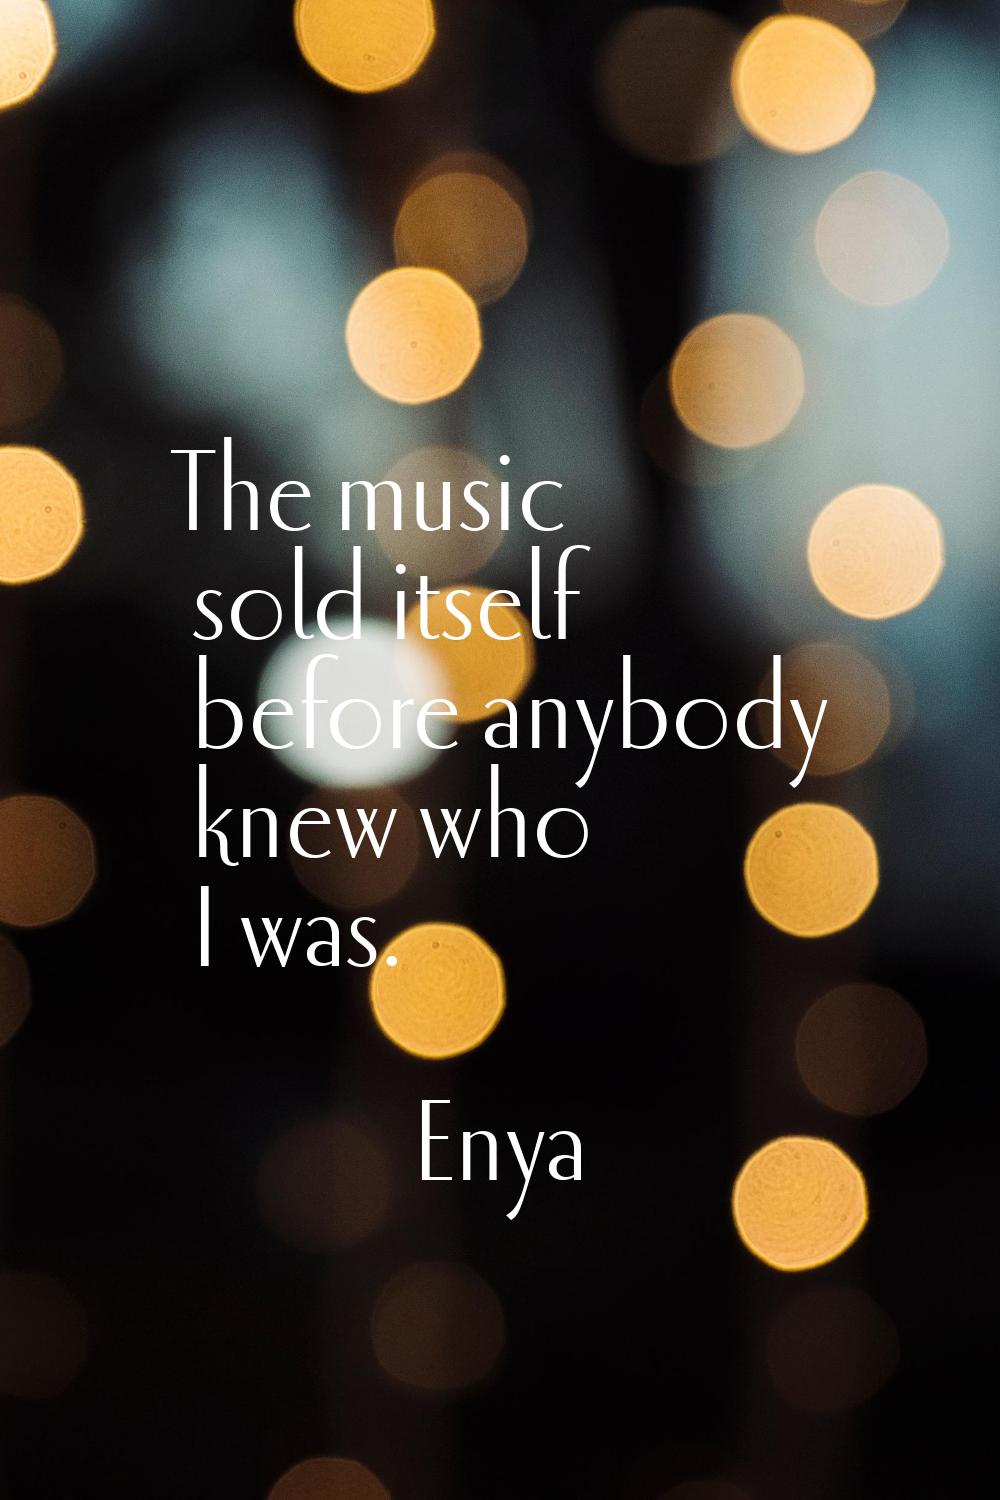 The music sold itself before anybody knew who I was.